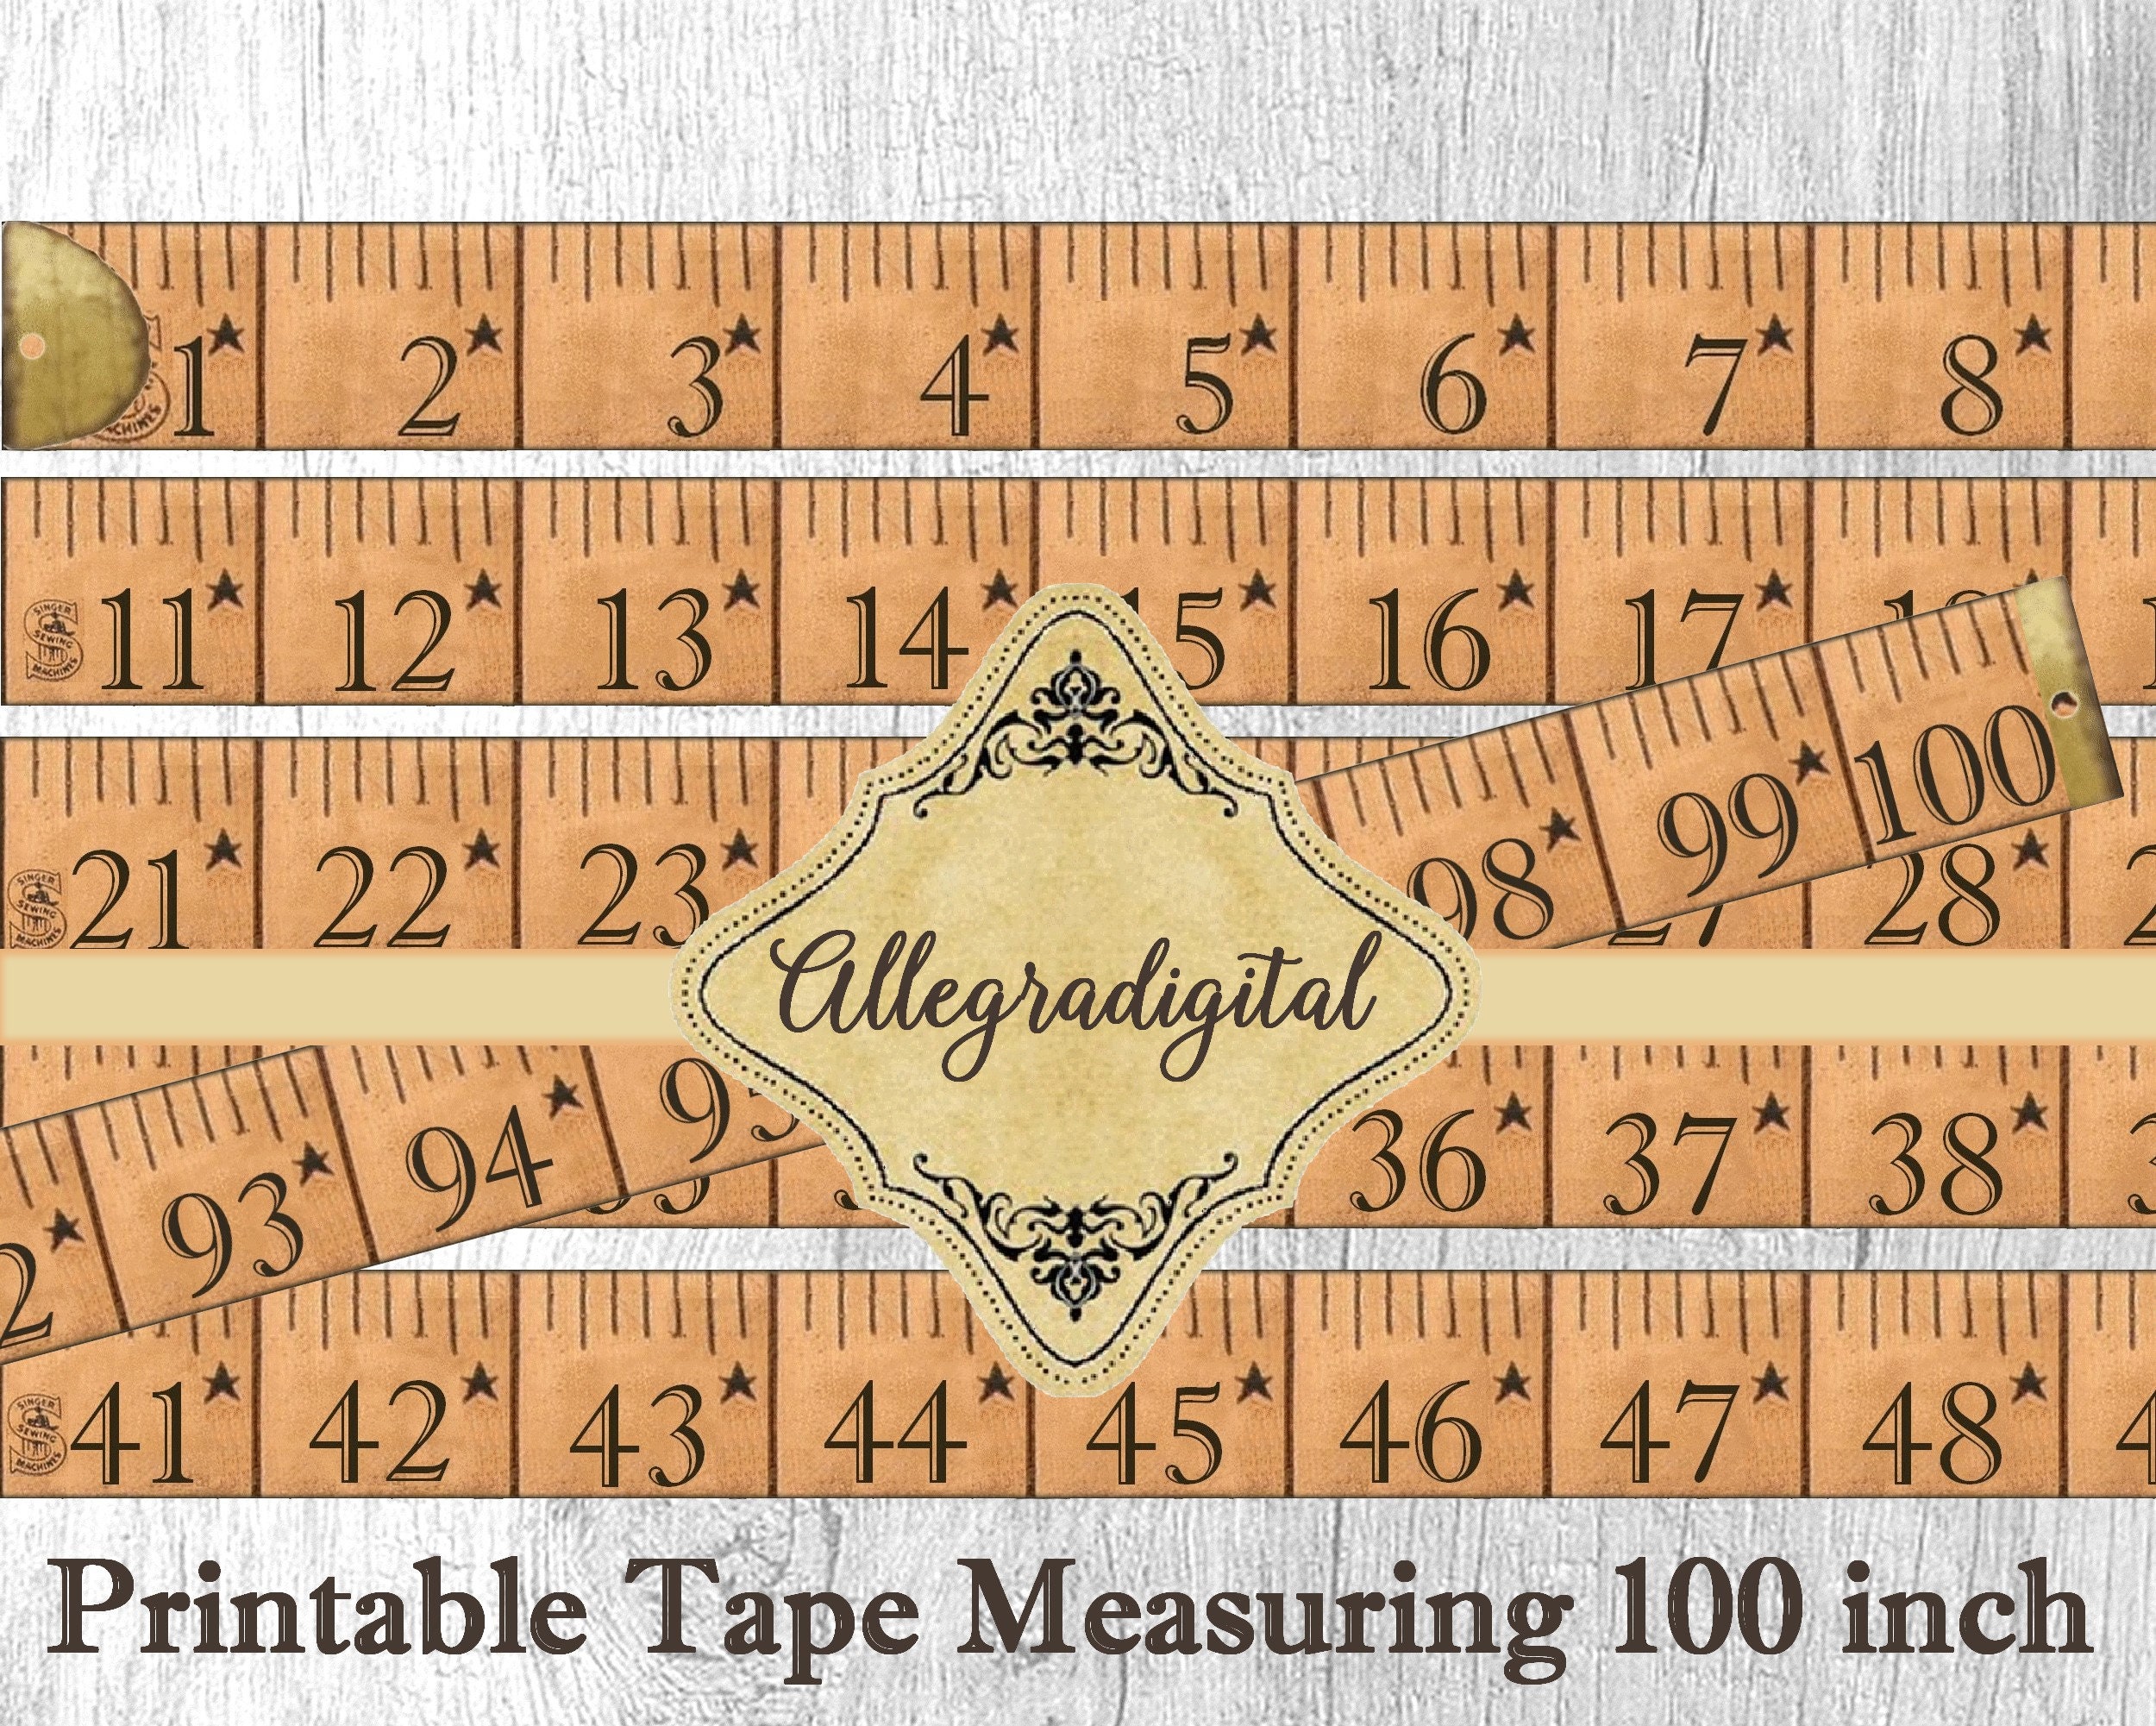 Free Printable Tape measure Ruler on 8.5 by 11 Inch Paper